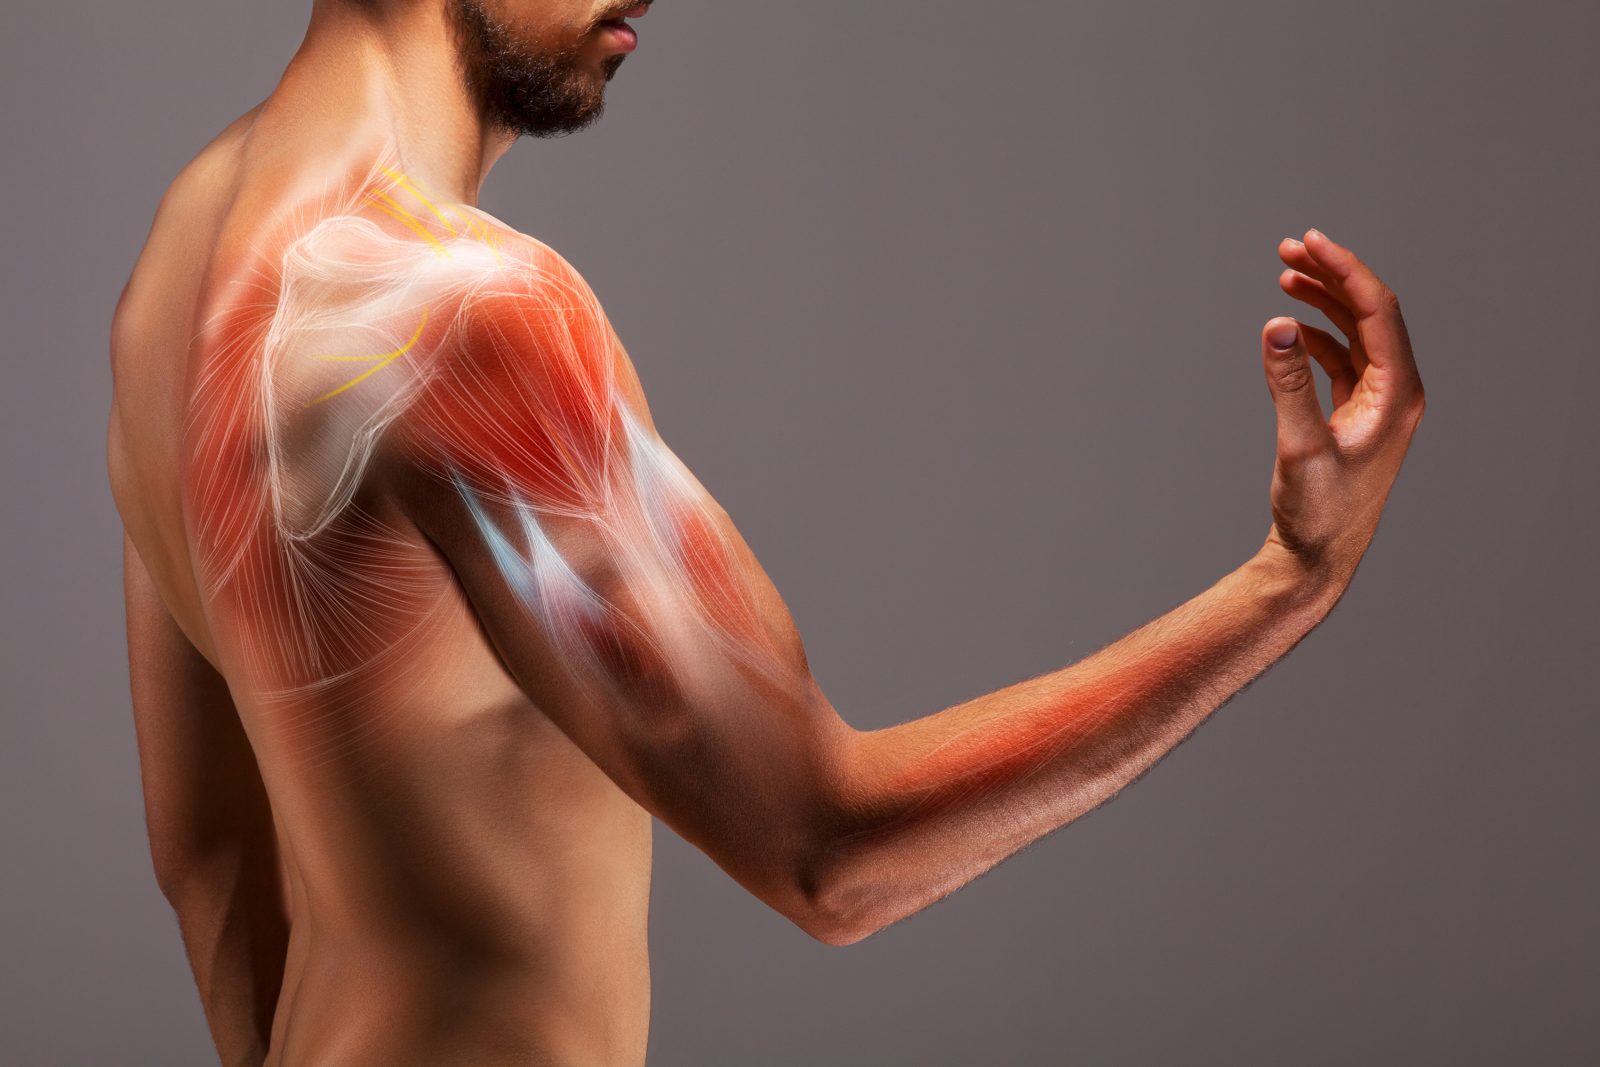 A man extends his arm. Overlaid on the arm is an illustrative representation of the structure and musculature of the human arm.